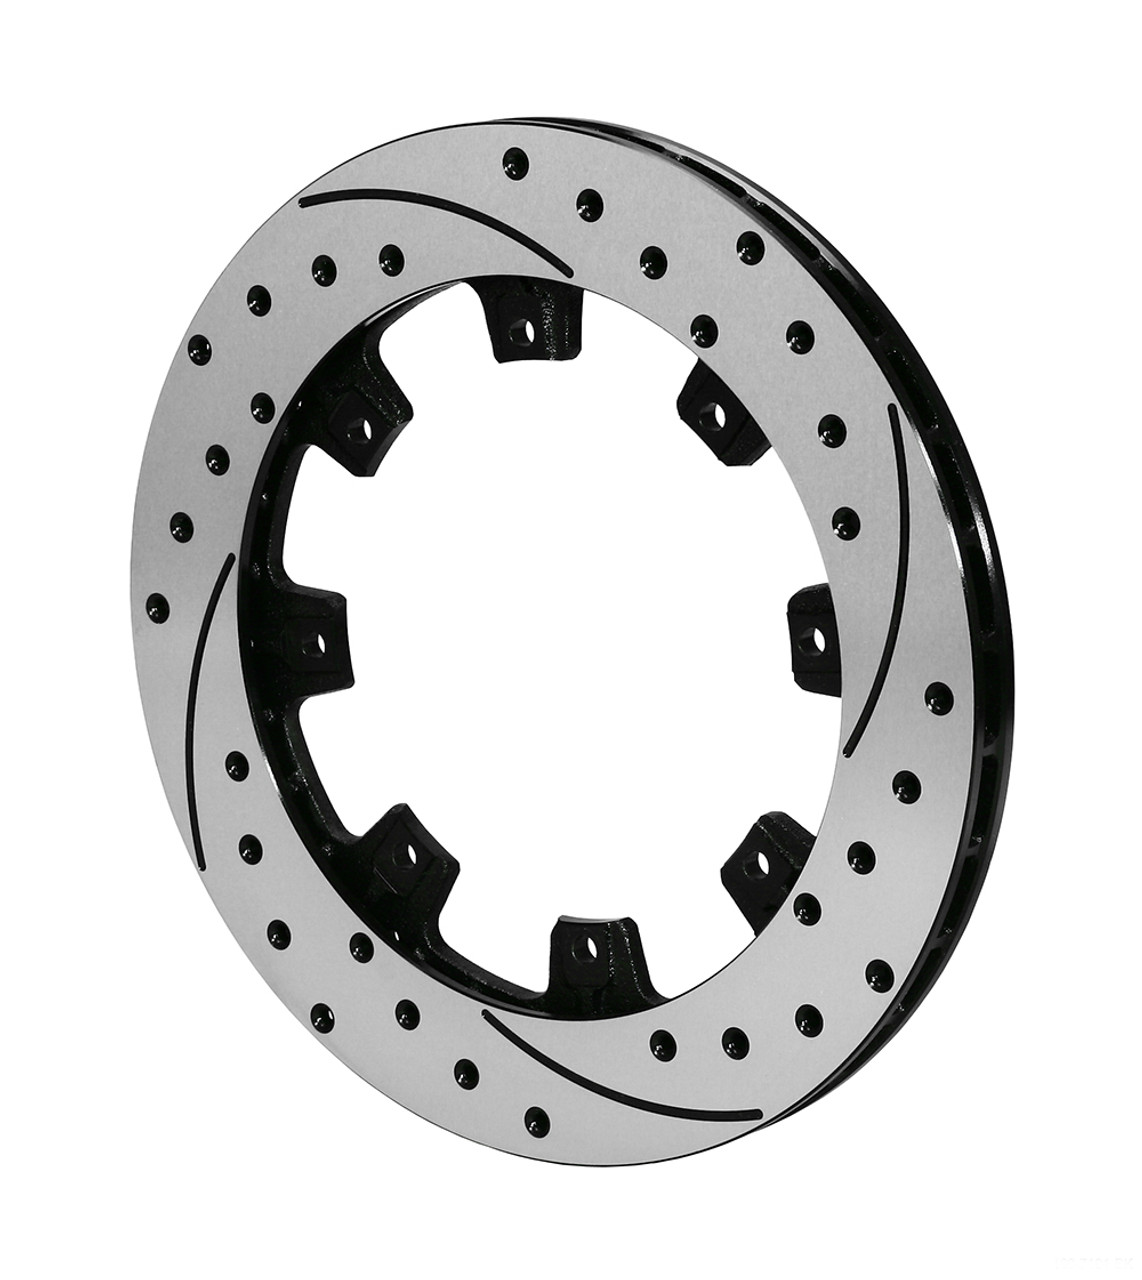 Wilwood SRP Drilled & Slotted Replacement Rotor Rings for Dynapro Radial Front Brake Kit for VW MK4